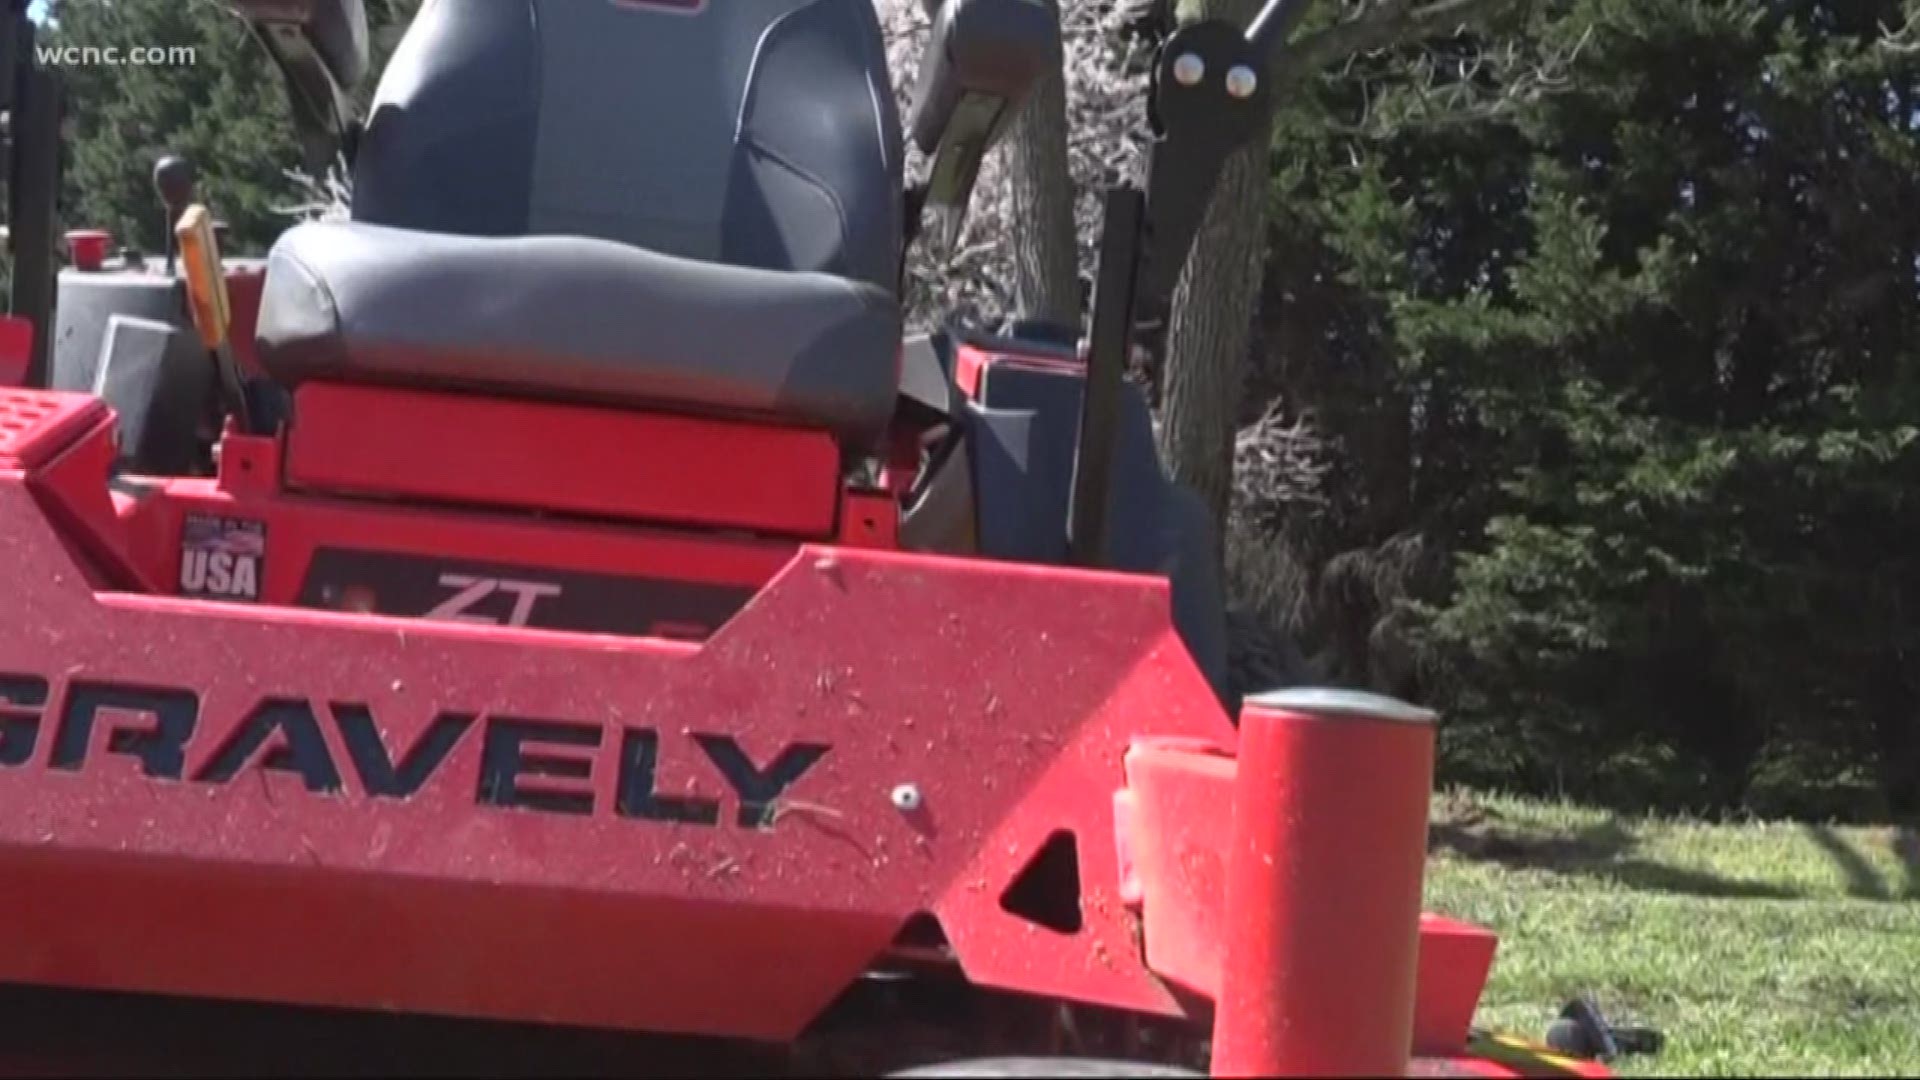 The woman stopped the mower, but the blades were still moving, according to authorities in Lincoln County.